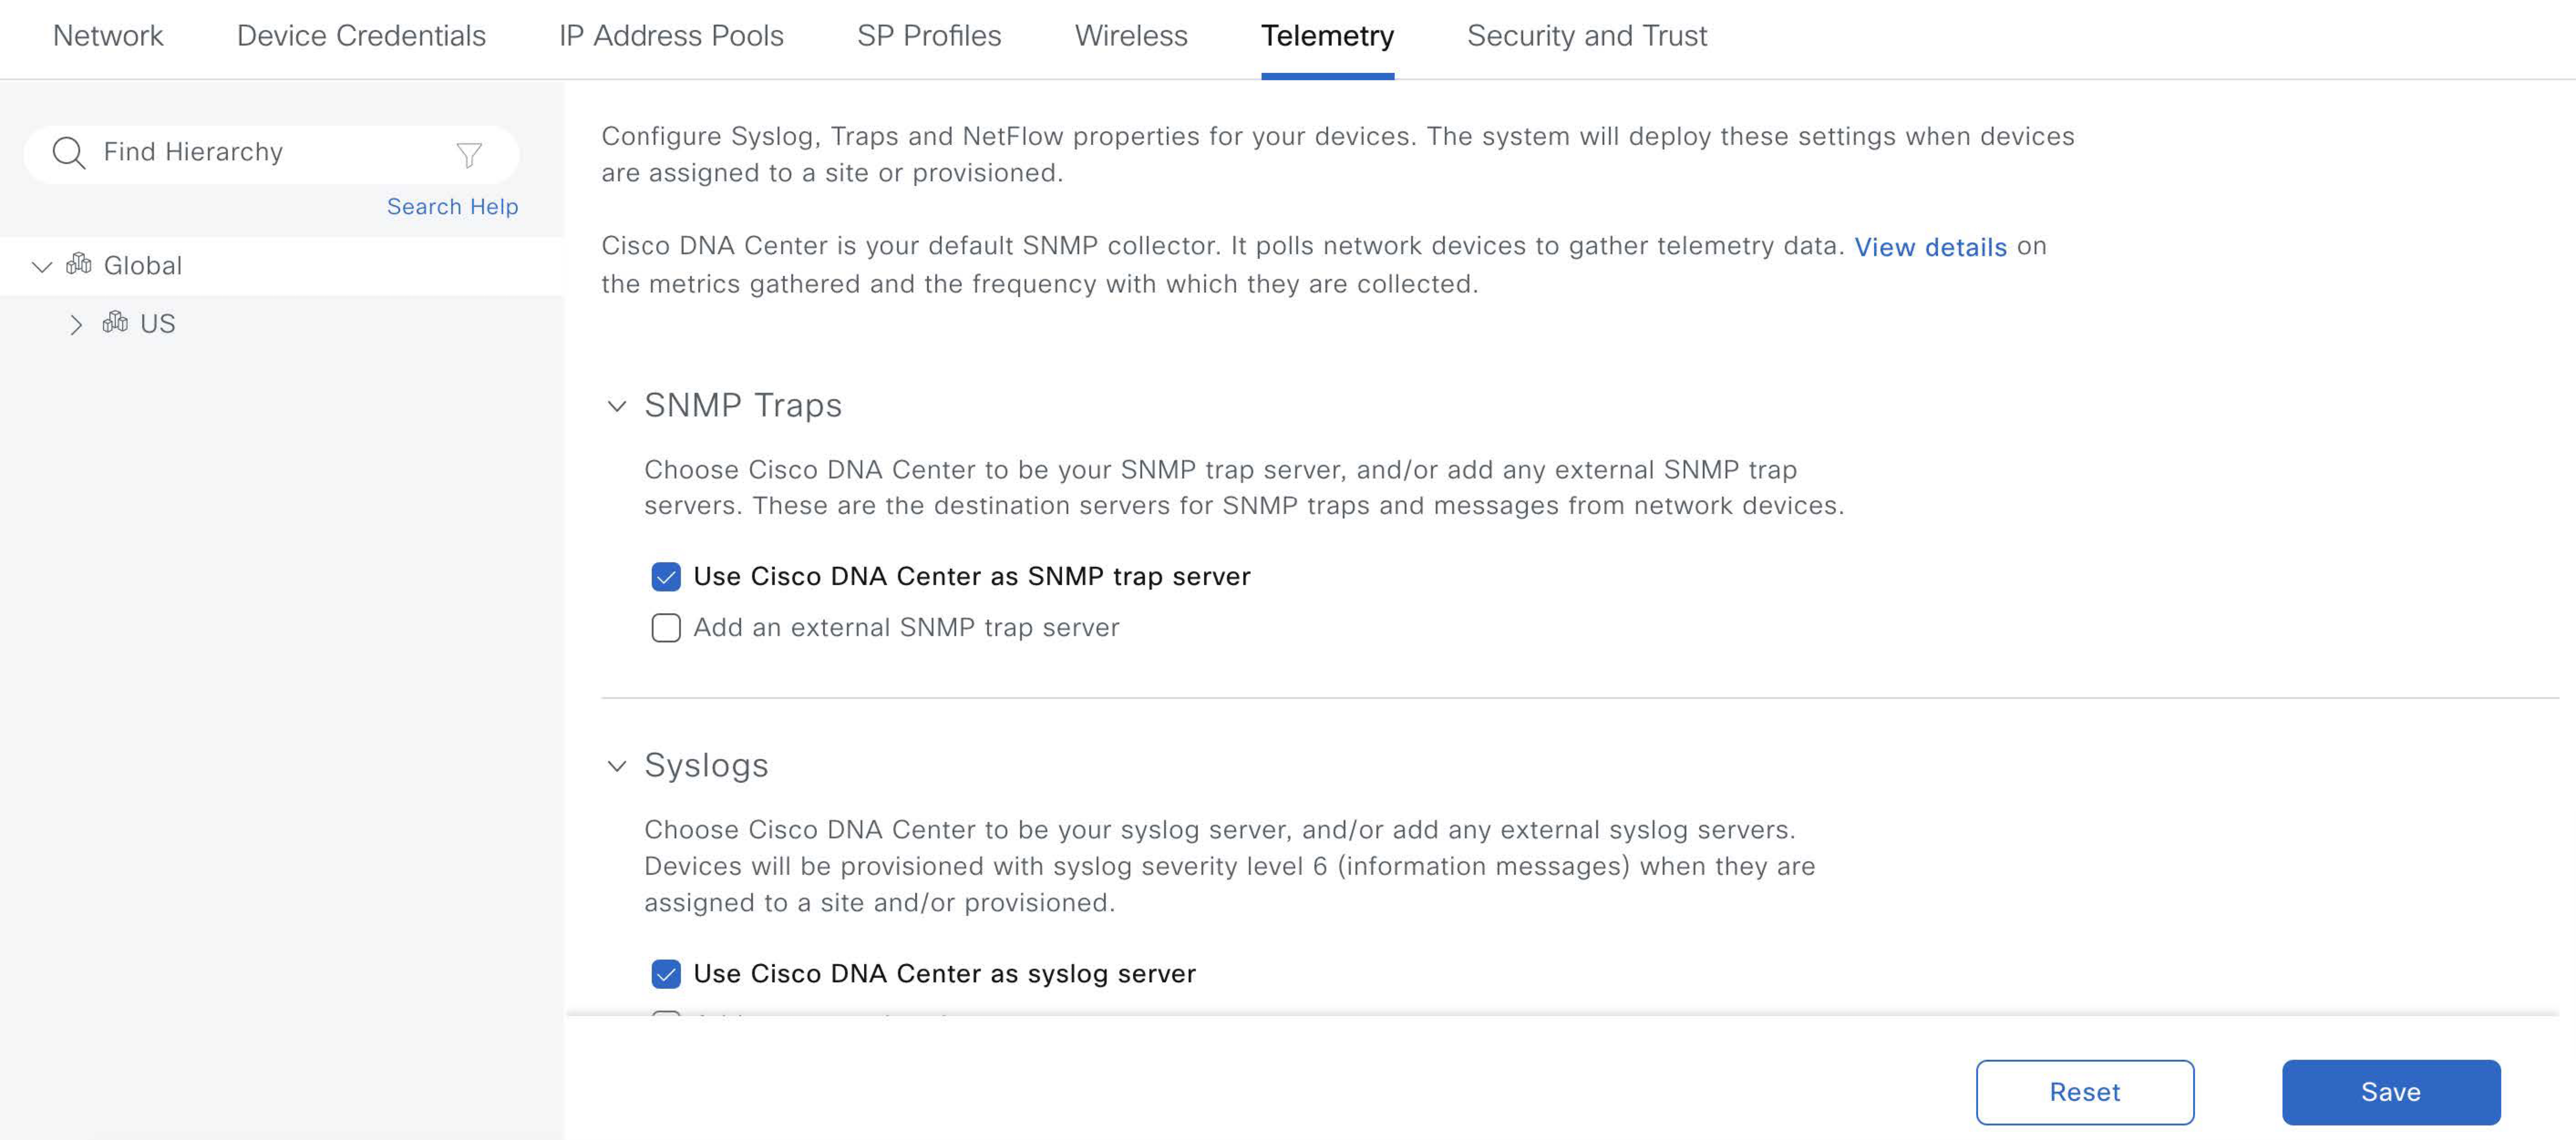 The SNMP Traps section displays the following options for configuration: "Use Cisco DNA Center as SNMP trap server" or "Add an external SNMP trap server."